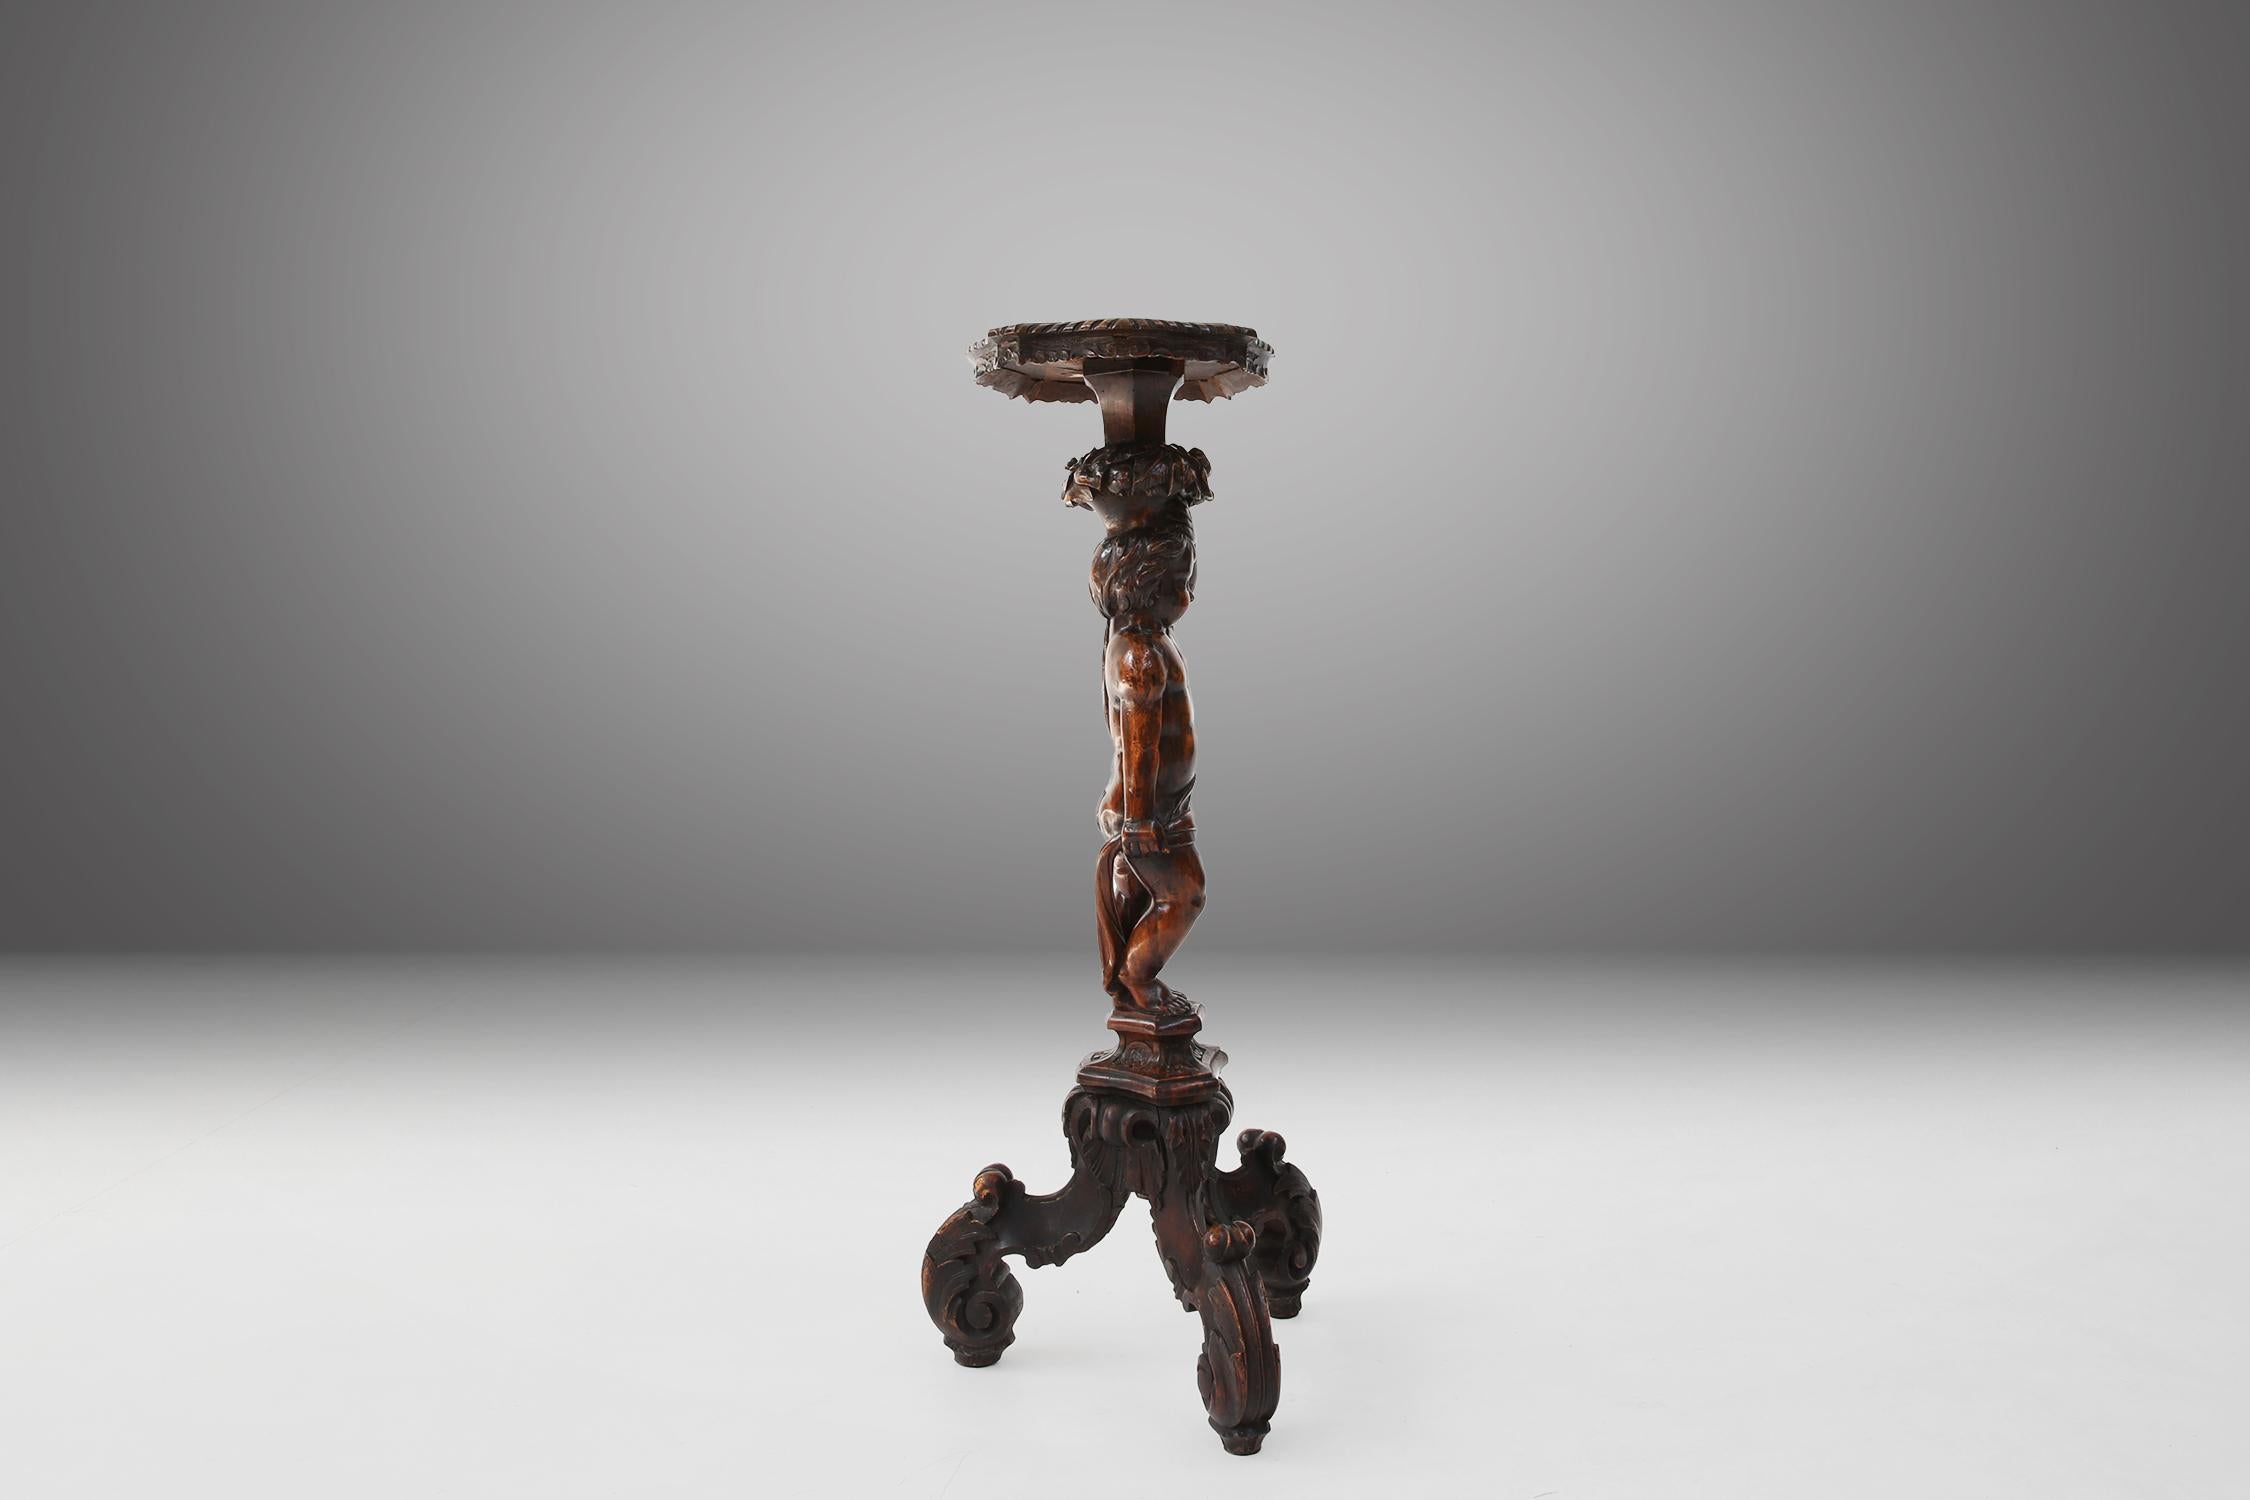 This table is made of solid wood, which means it has a sturdy and durable construction. The wood has a beautiful patina, which is a sign of the age and quality of the material. The table dates from around 1850, which makes it an antique and valuable